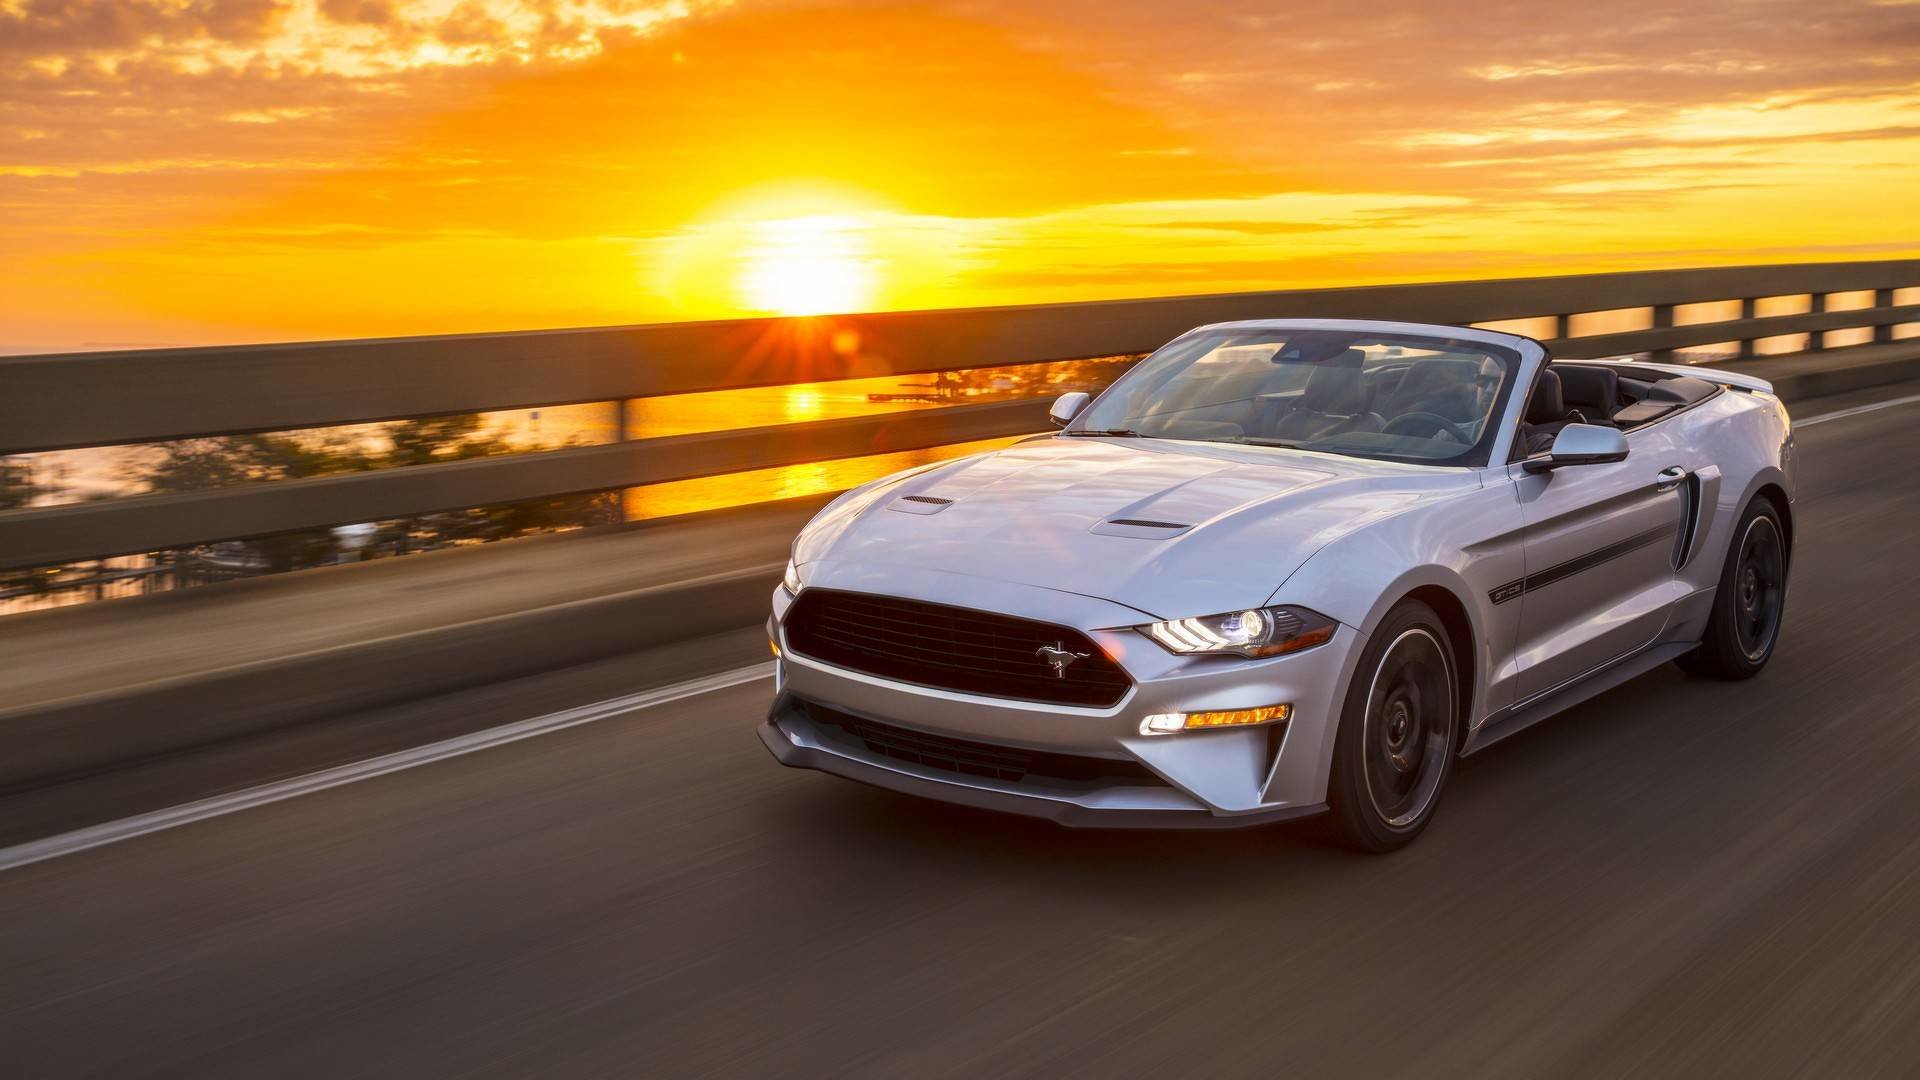 Ford Mustang (2019) California Special